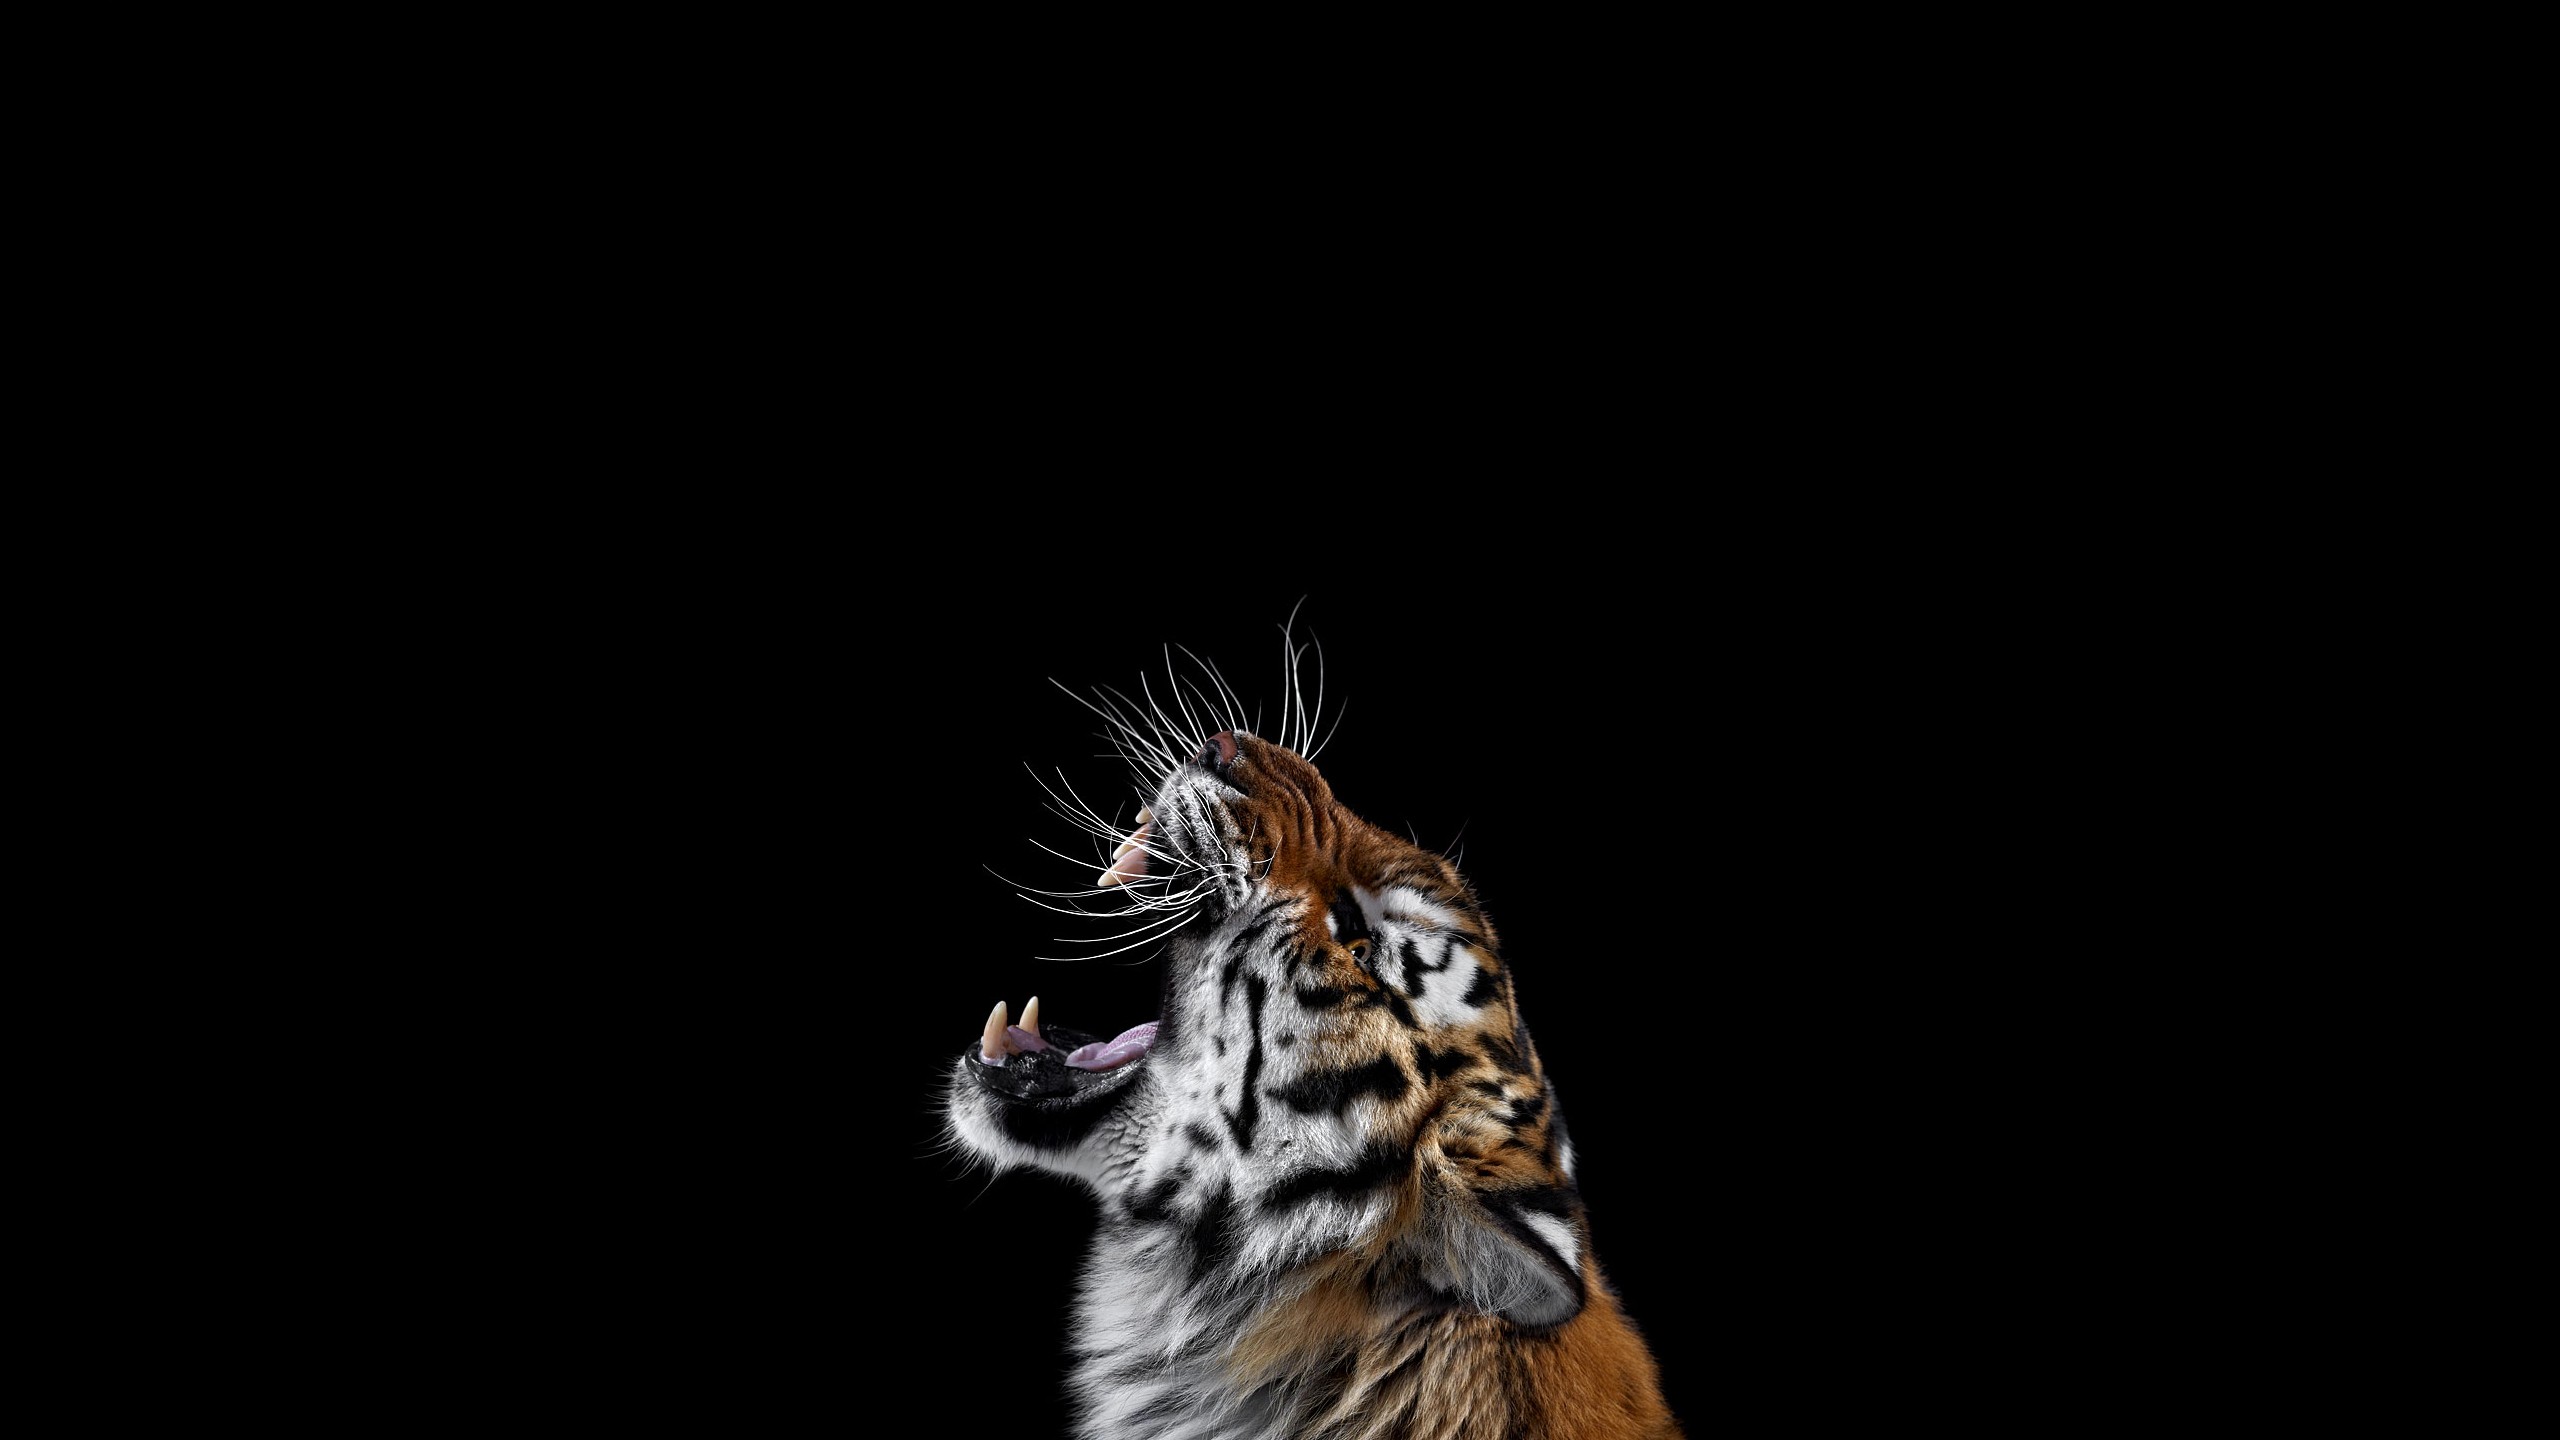 Tiger Angry Photography Background wallpaper animals